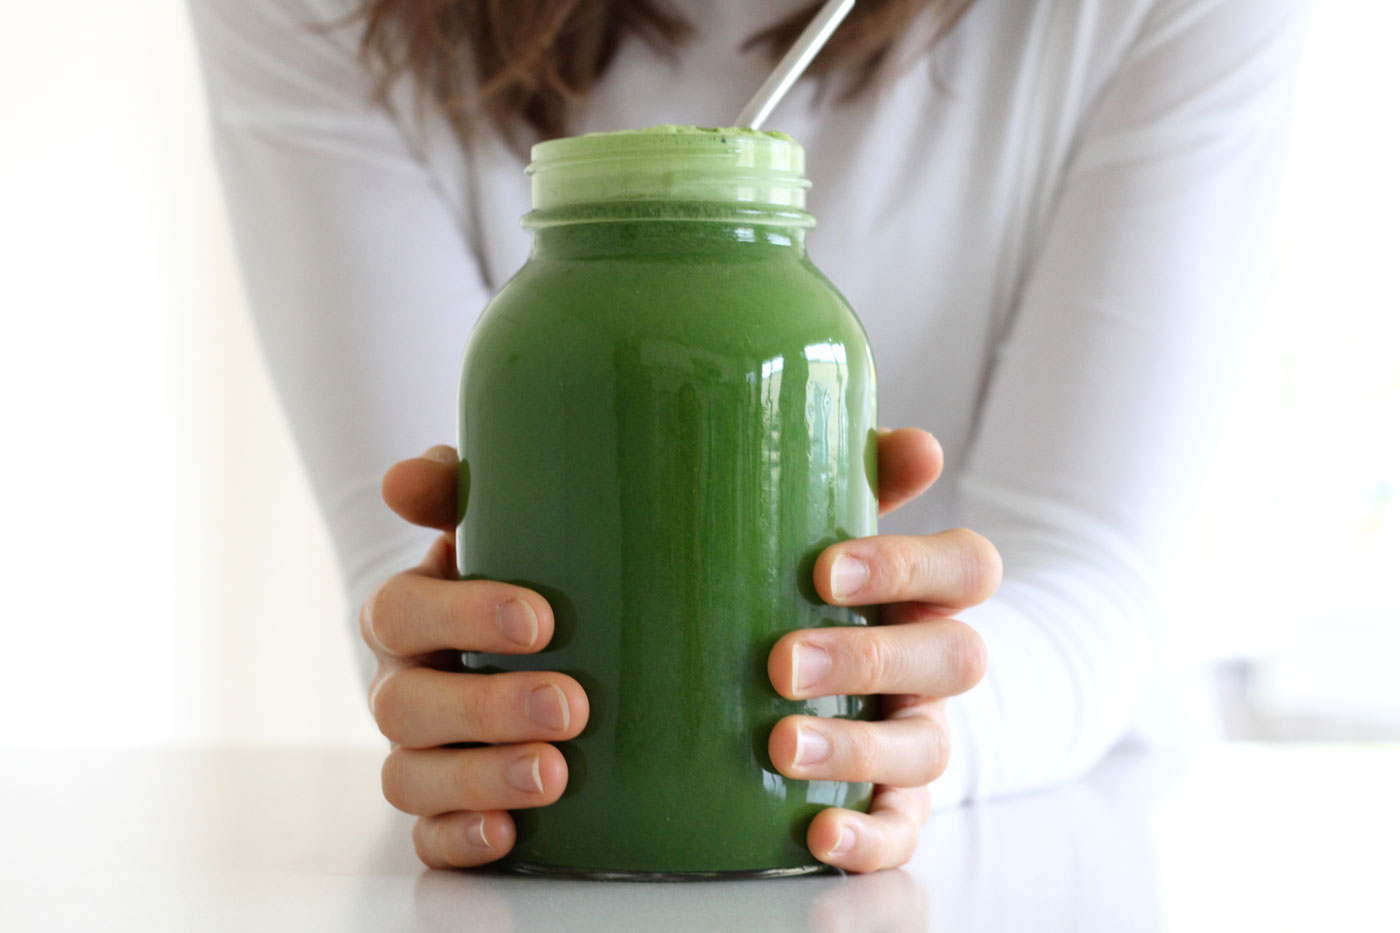 This is a lemon & greens juice recipe for immunity building